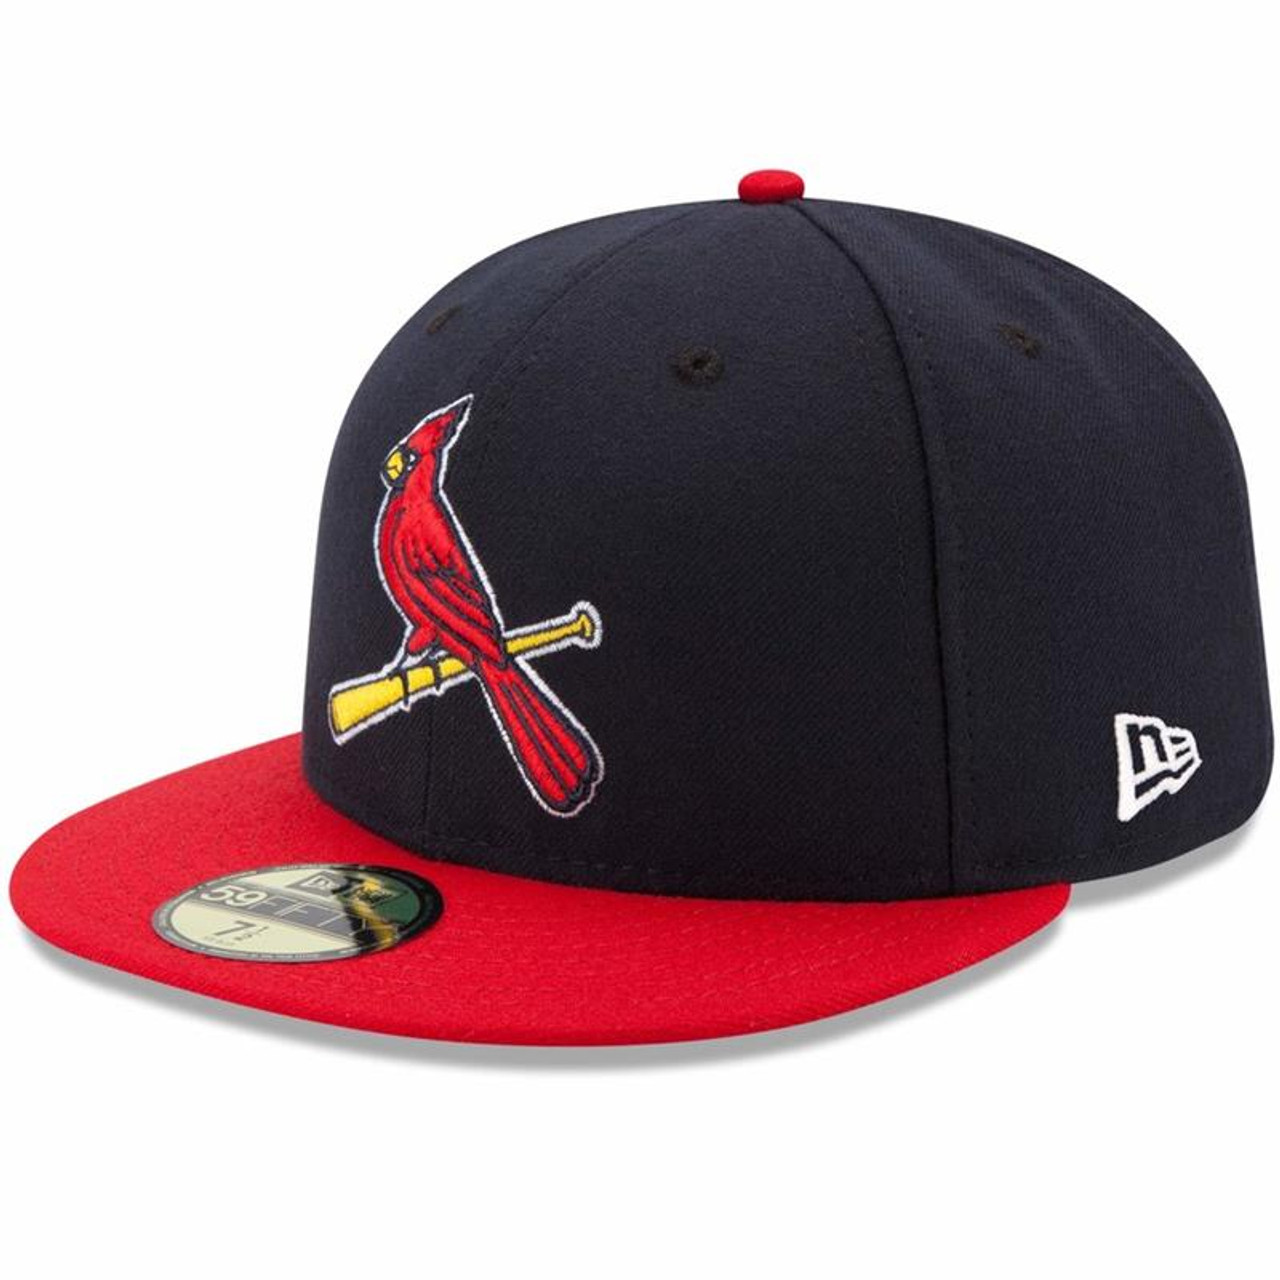 Men's New Era Royal St. Louis Cardinals White Logo 59FIFTY Fitted Hat